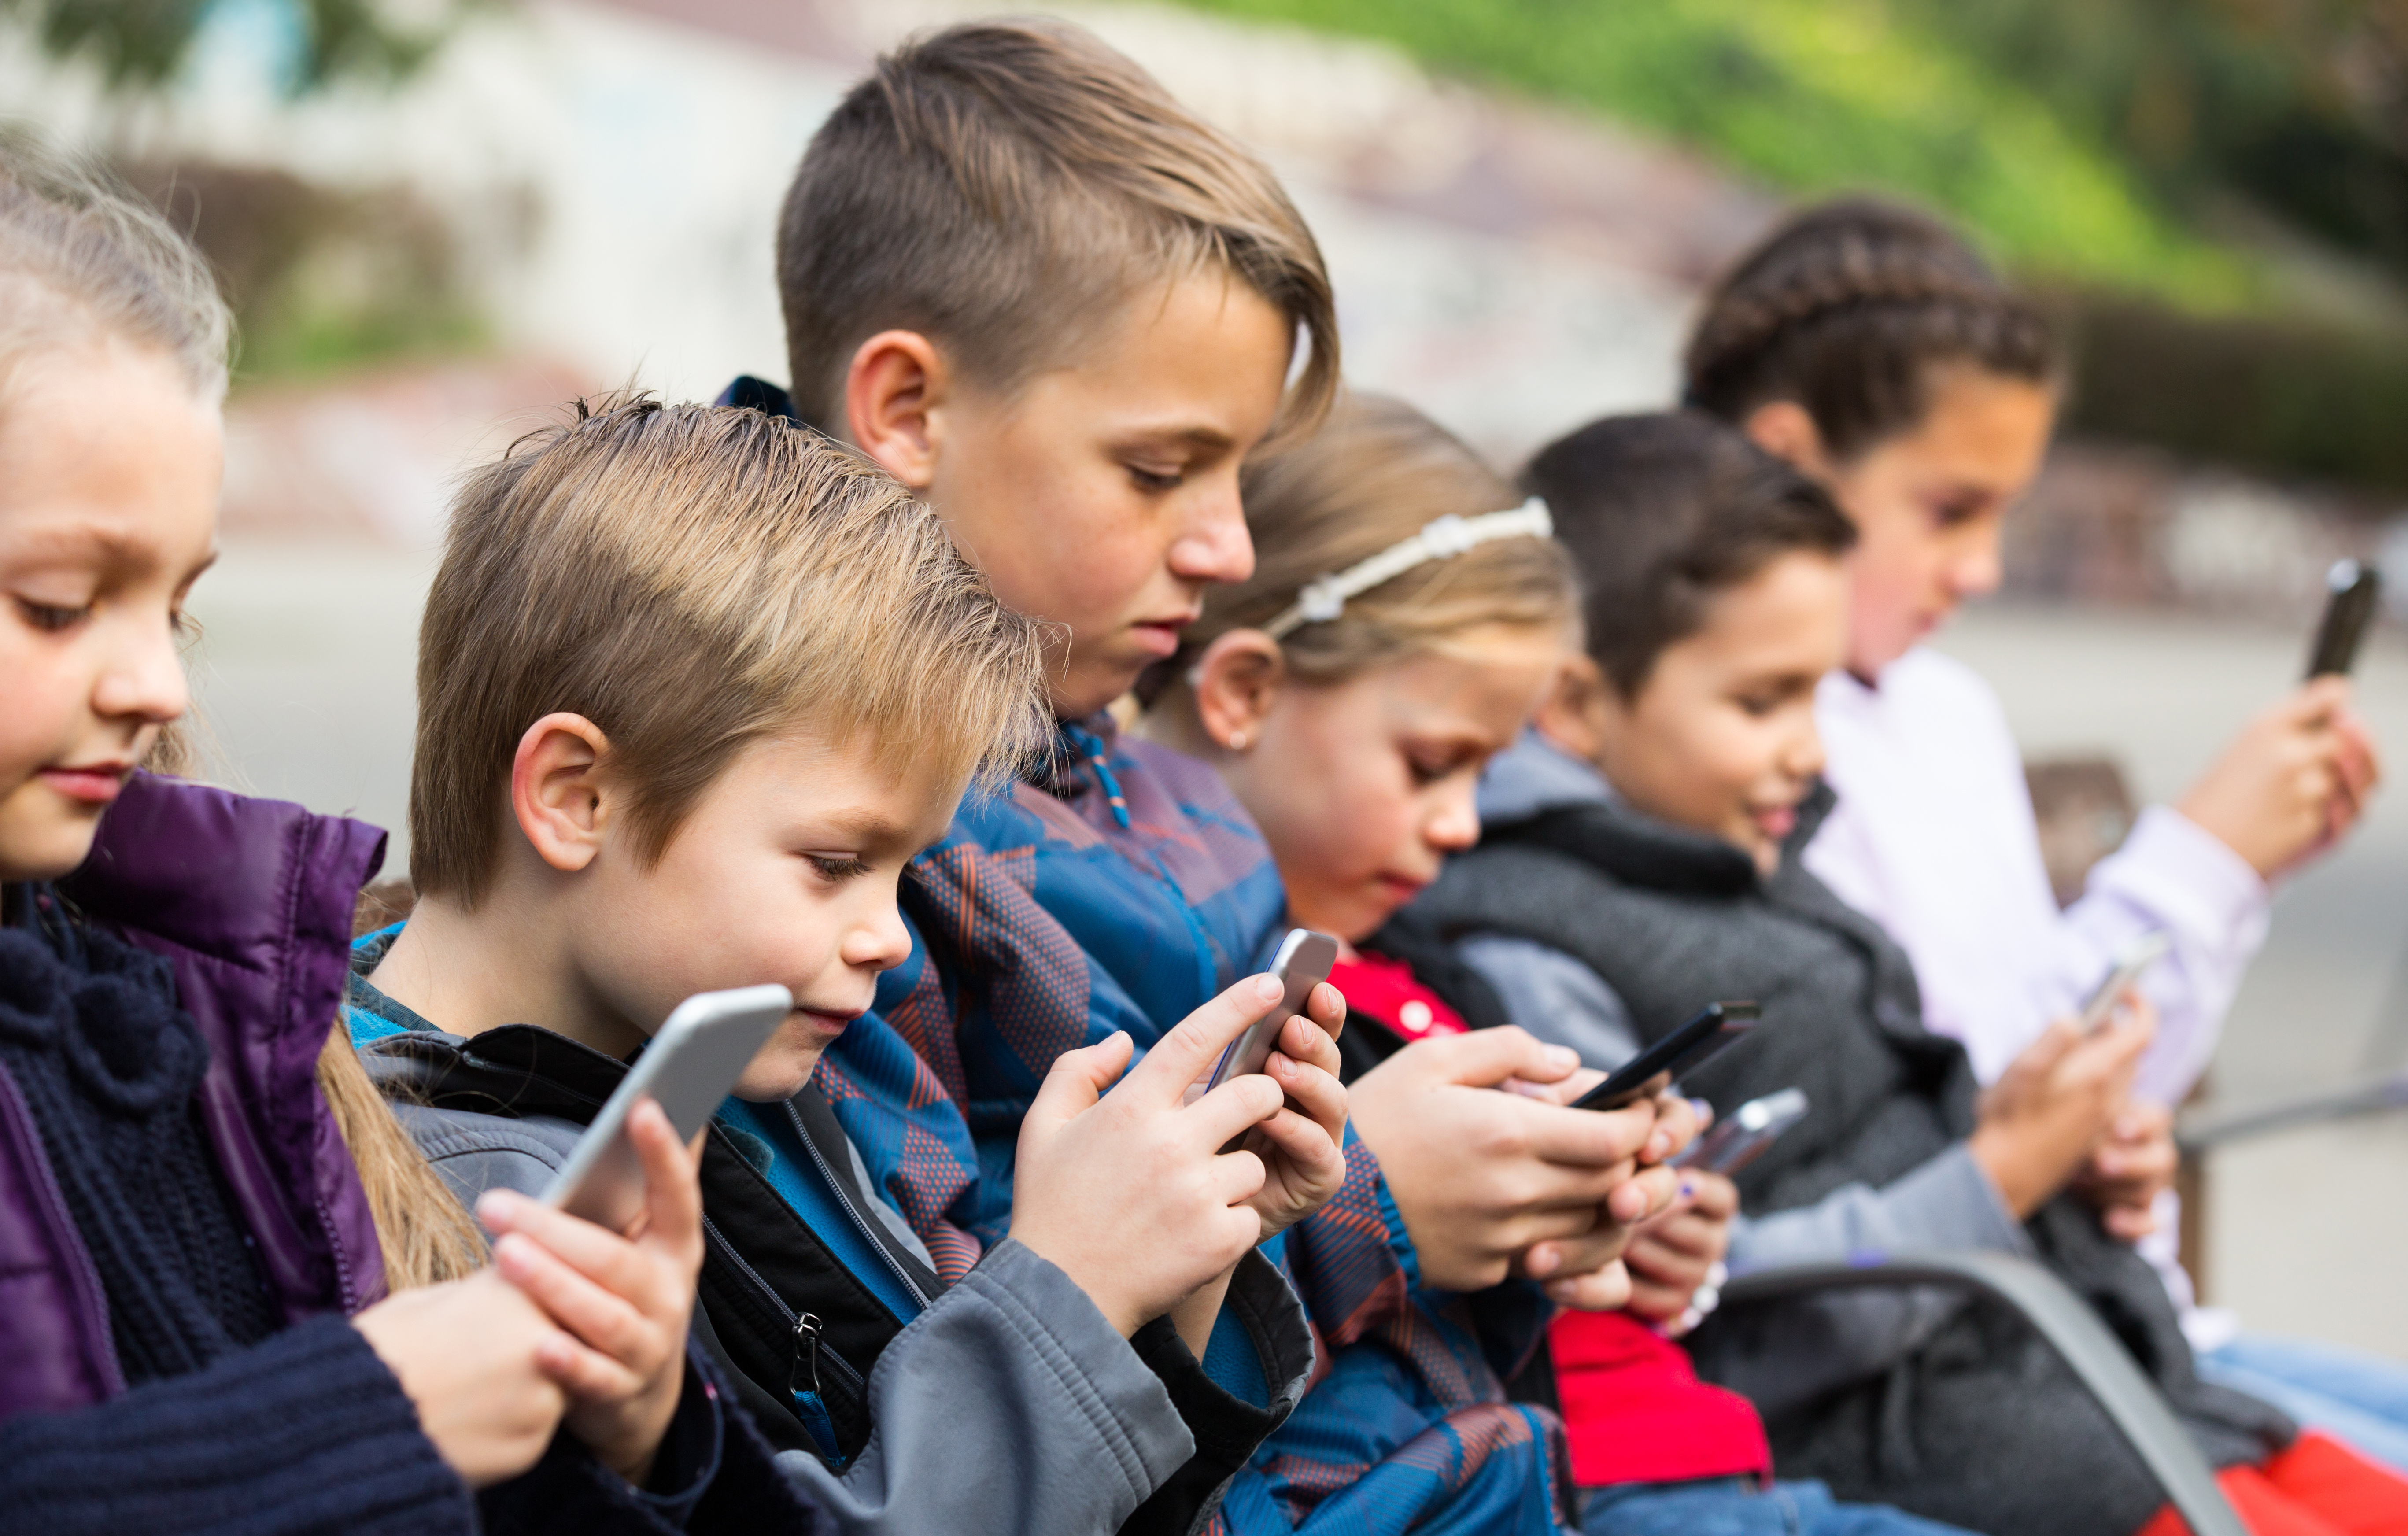 Children in a row looking at their smartphones | Digital Wings keeping children safe online